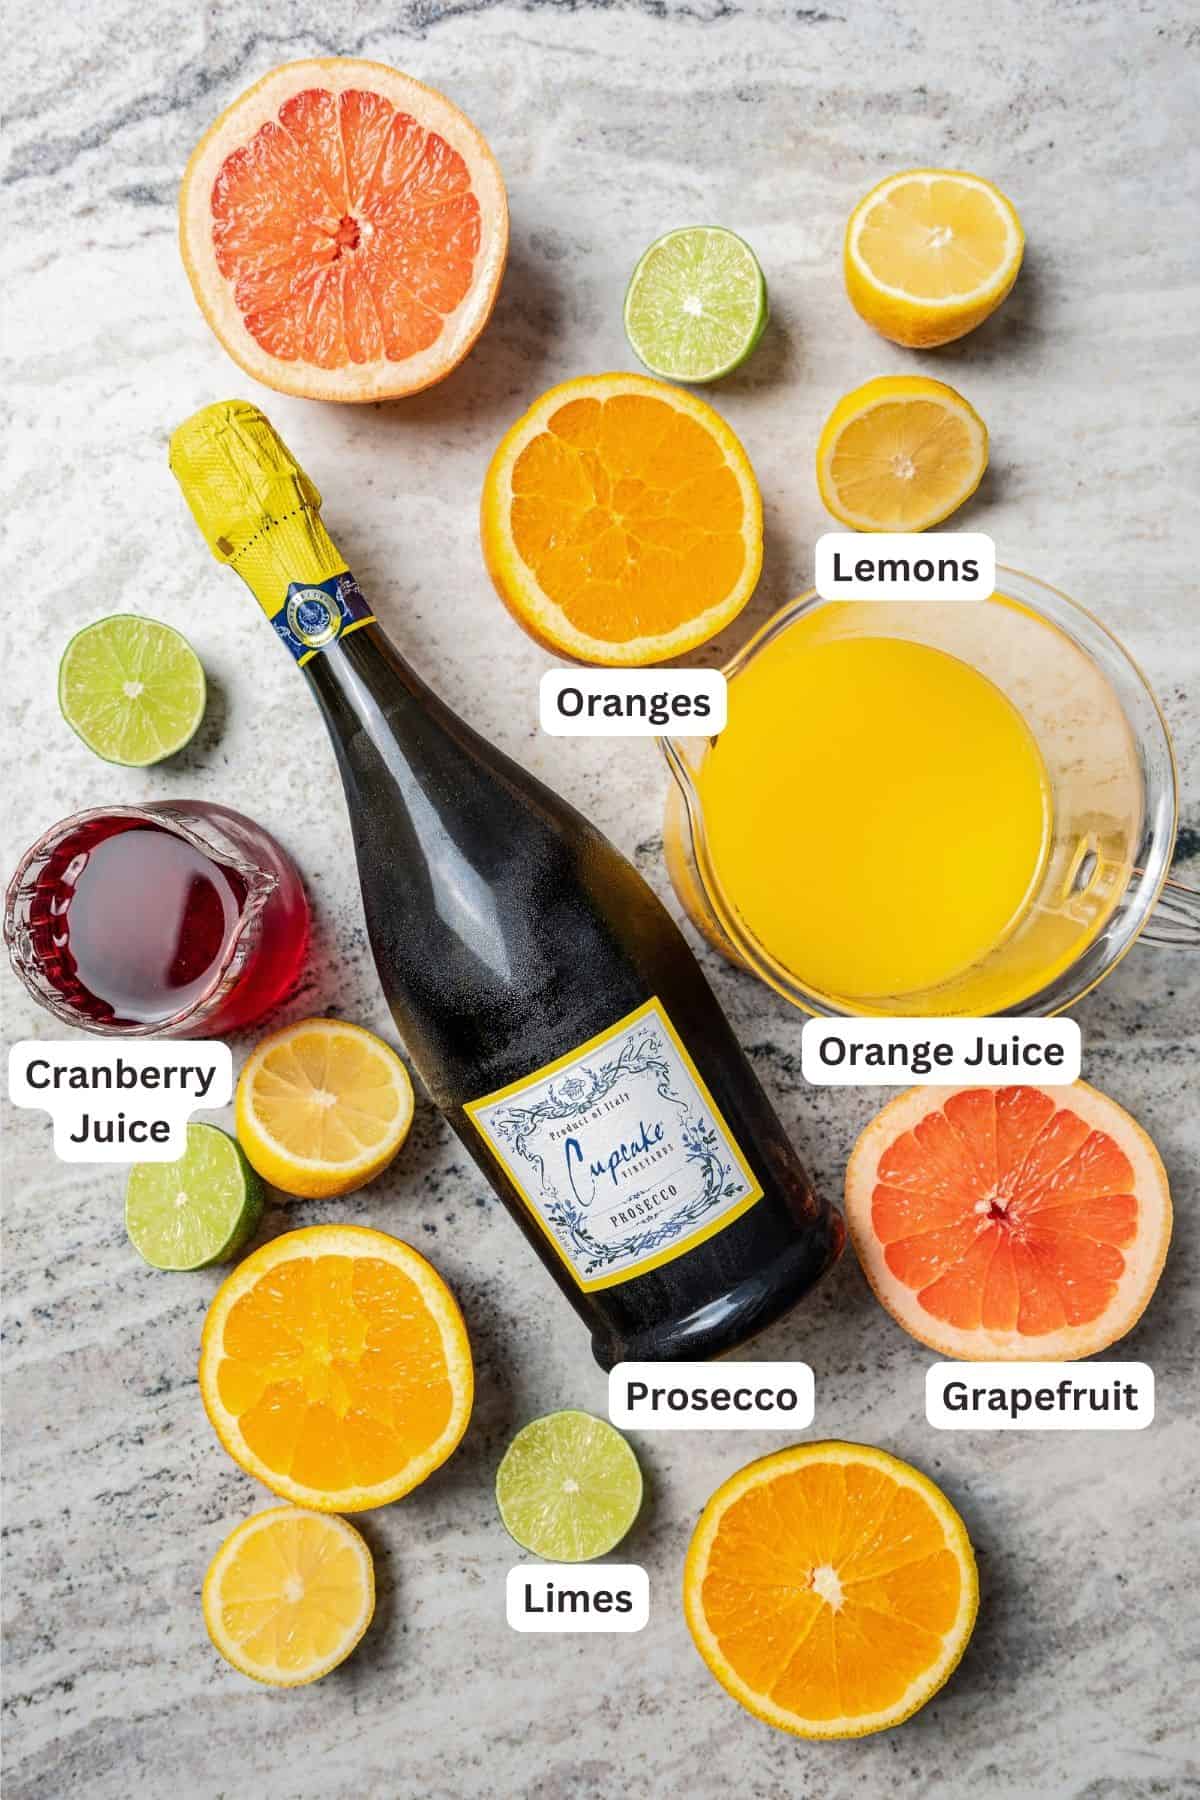 Mimosa ingredients with text labels overlaying each ingredient.